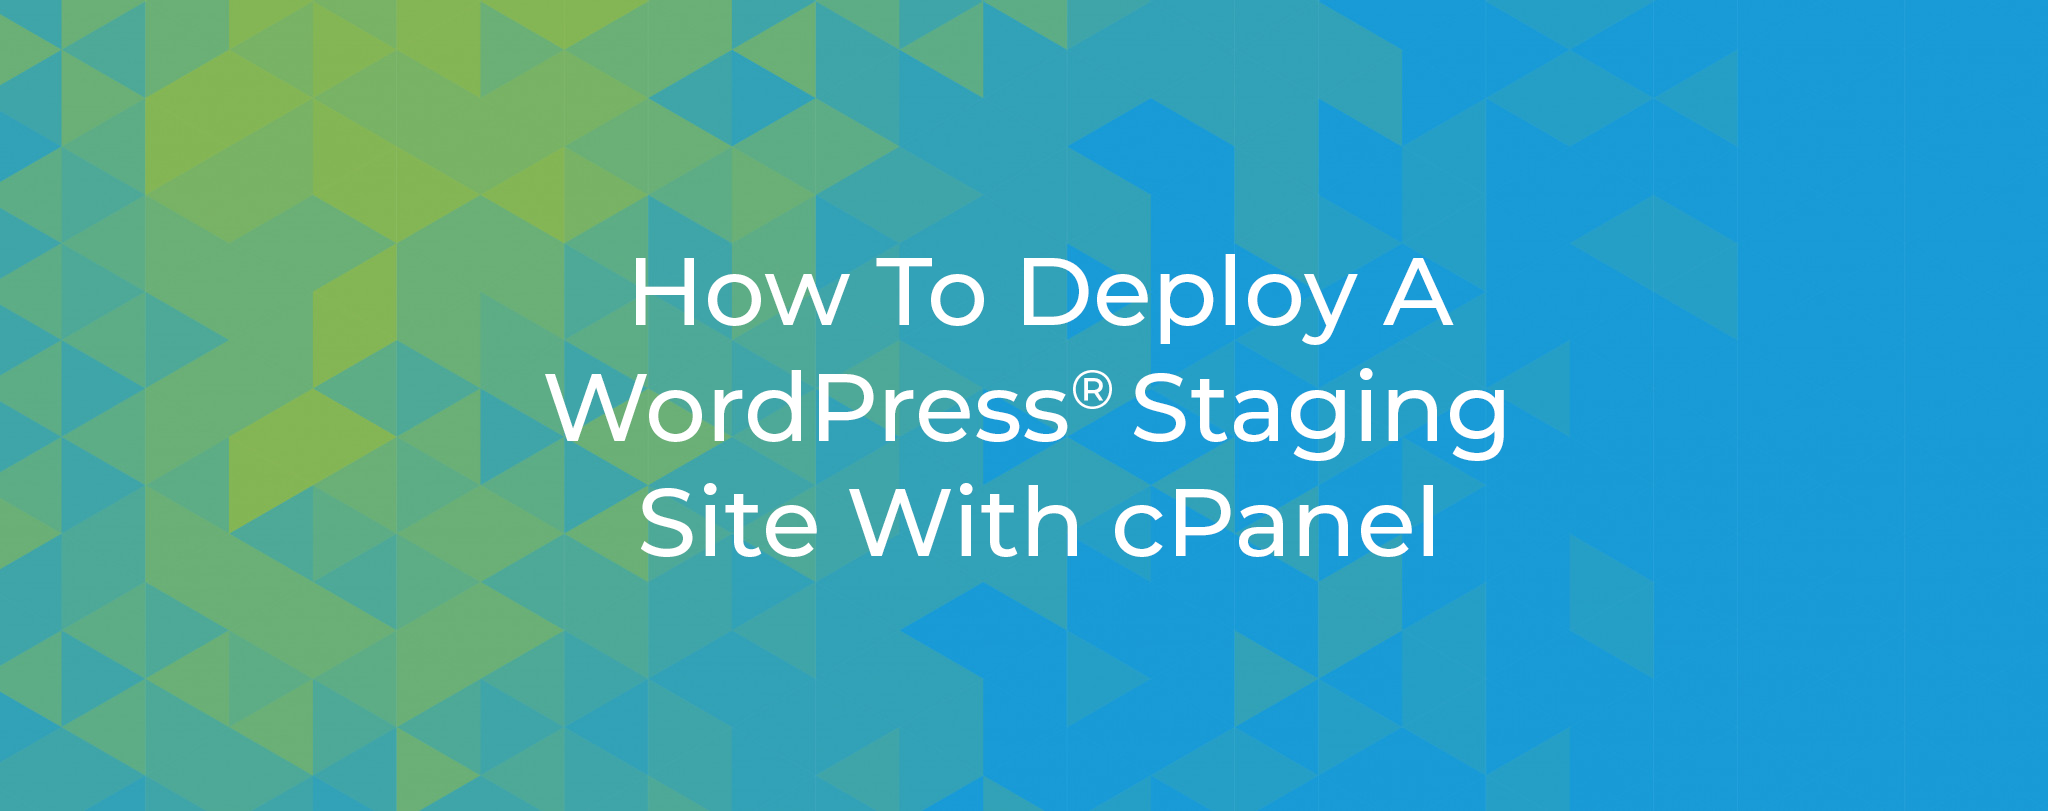 How to Deploy a WordPress® Staging Site With cPanel